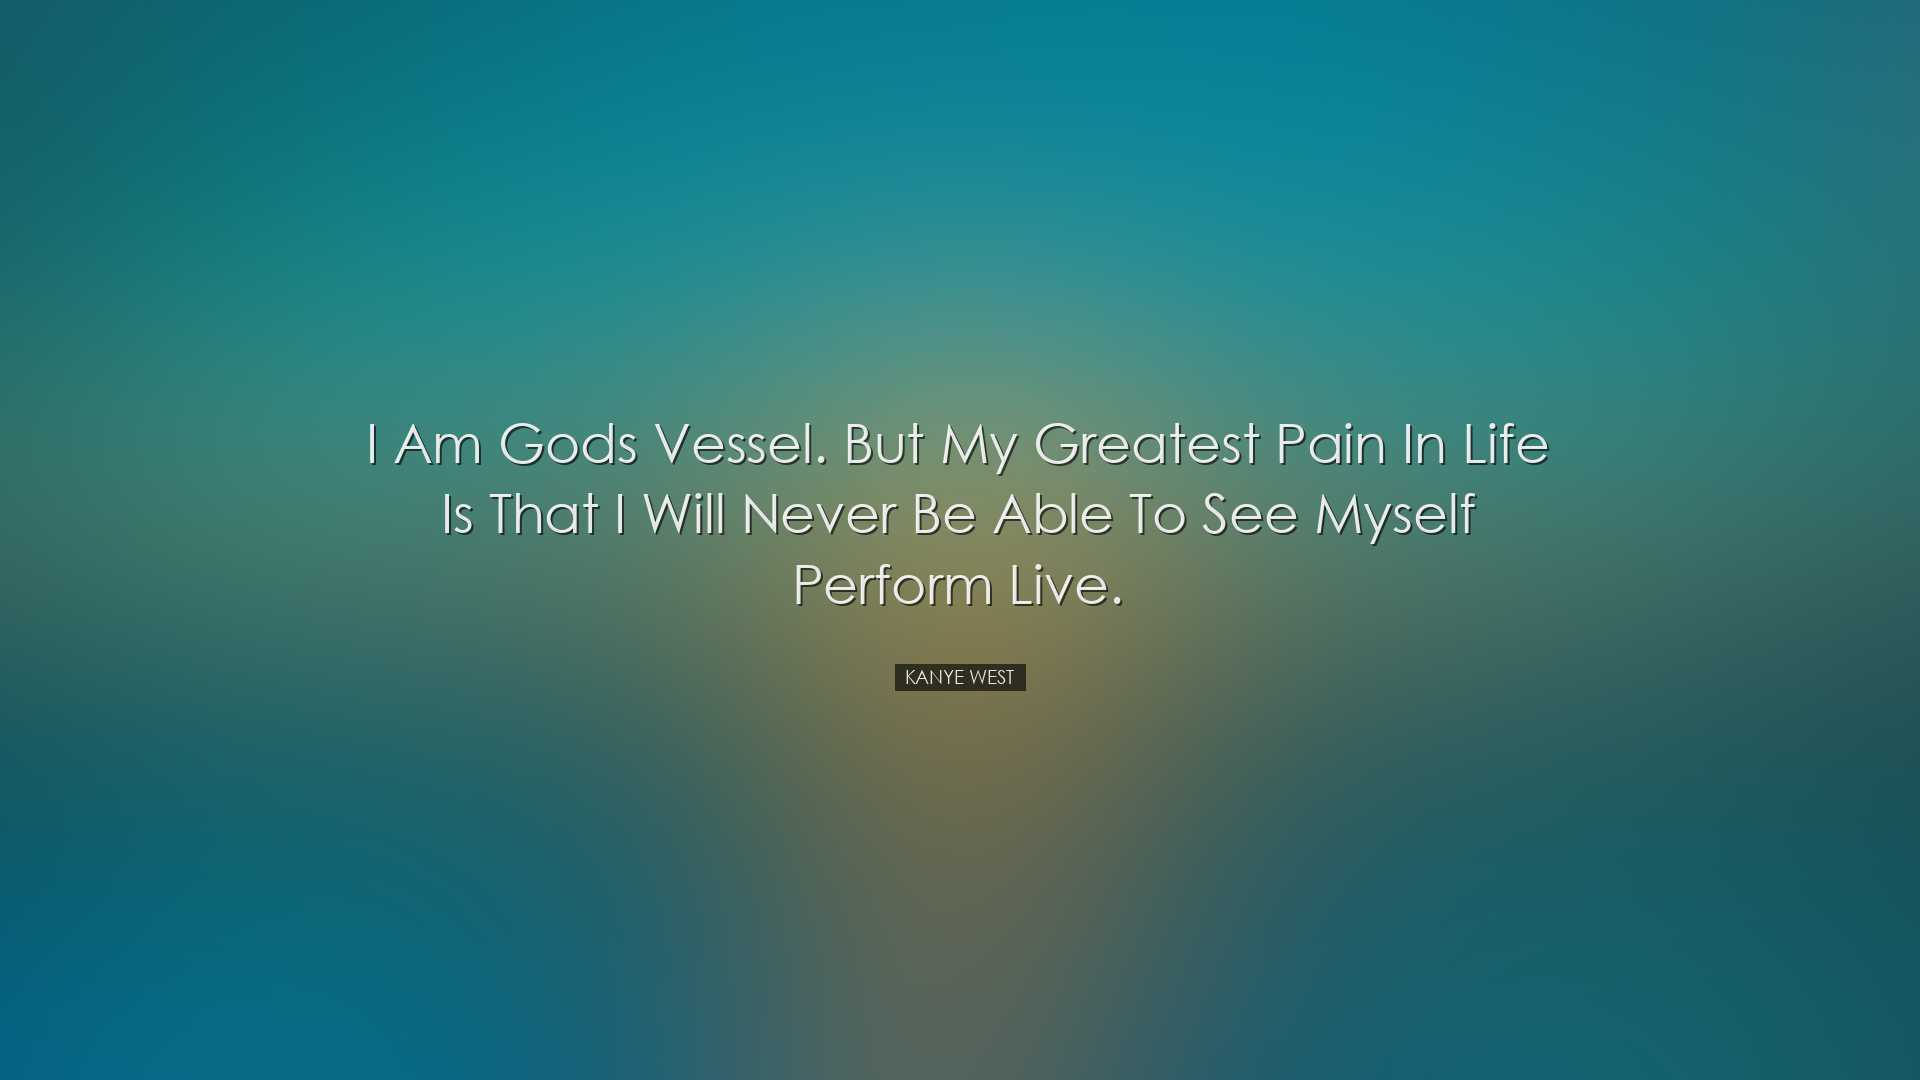 I am Gods vessel. But my greatest pain in life is that I will neve